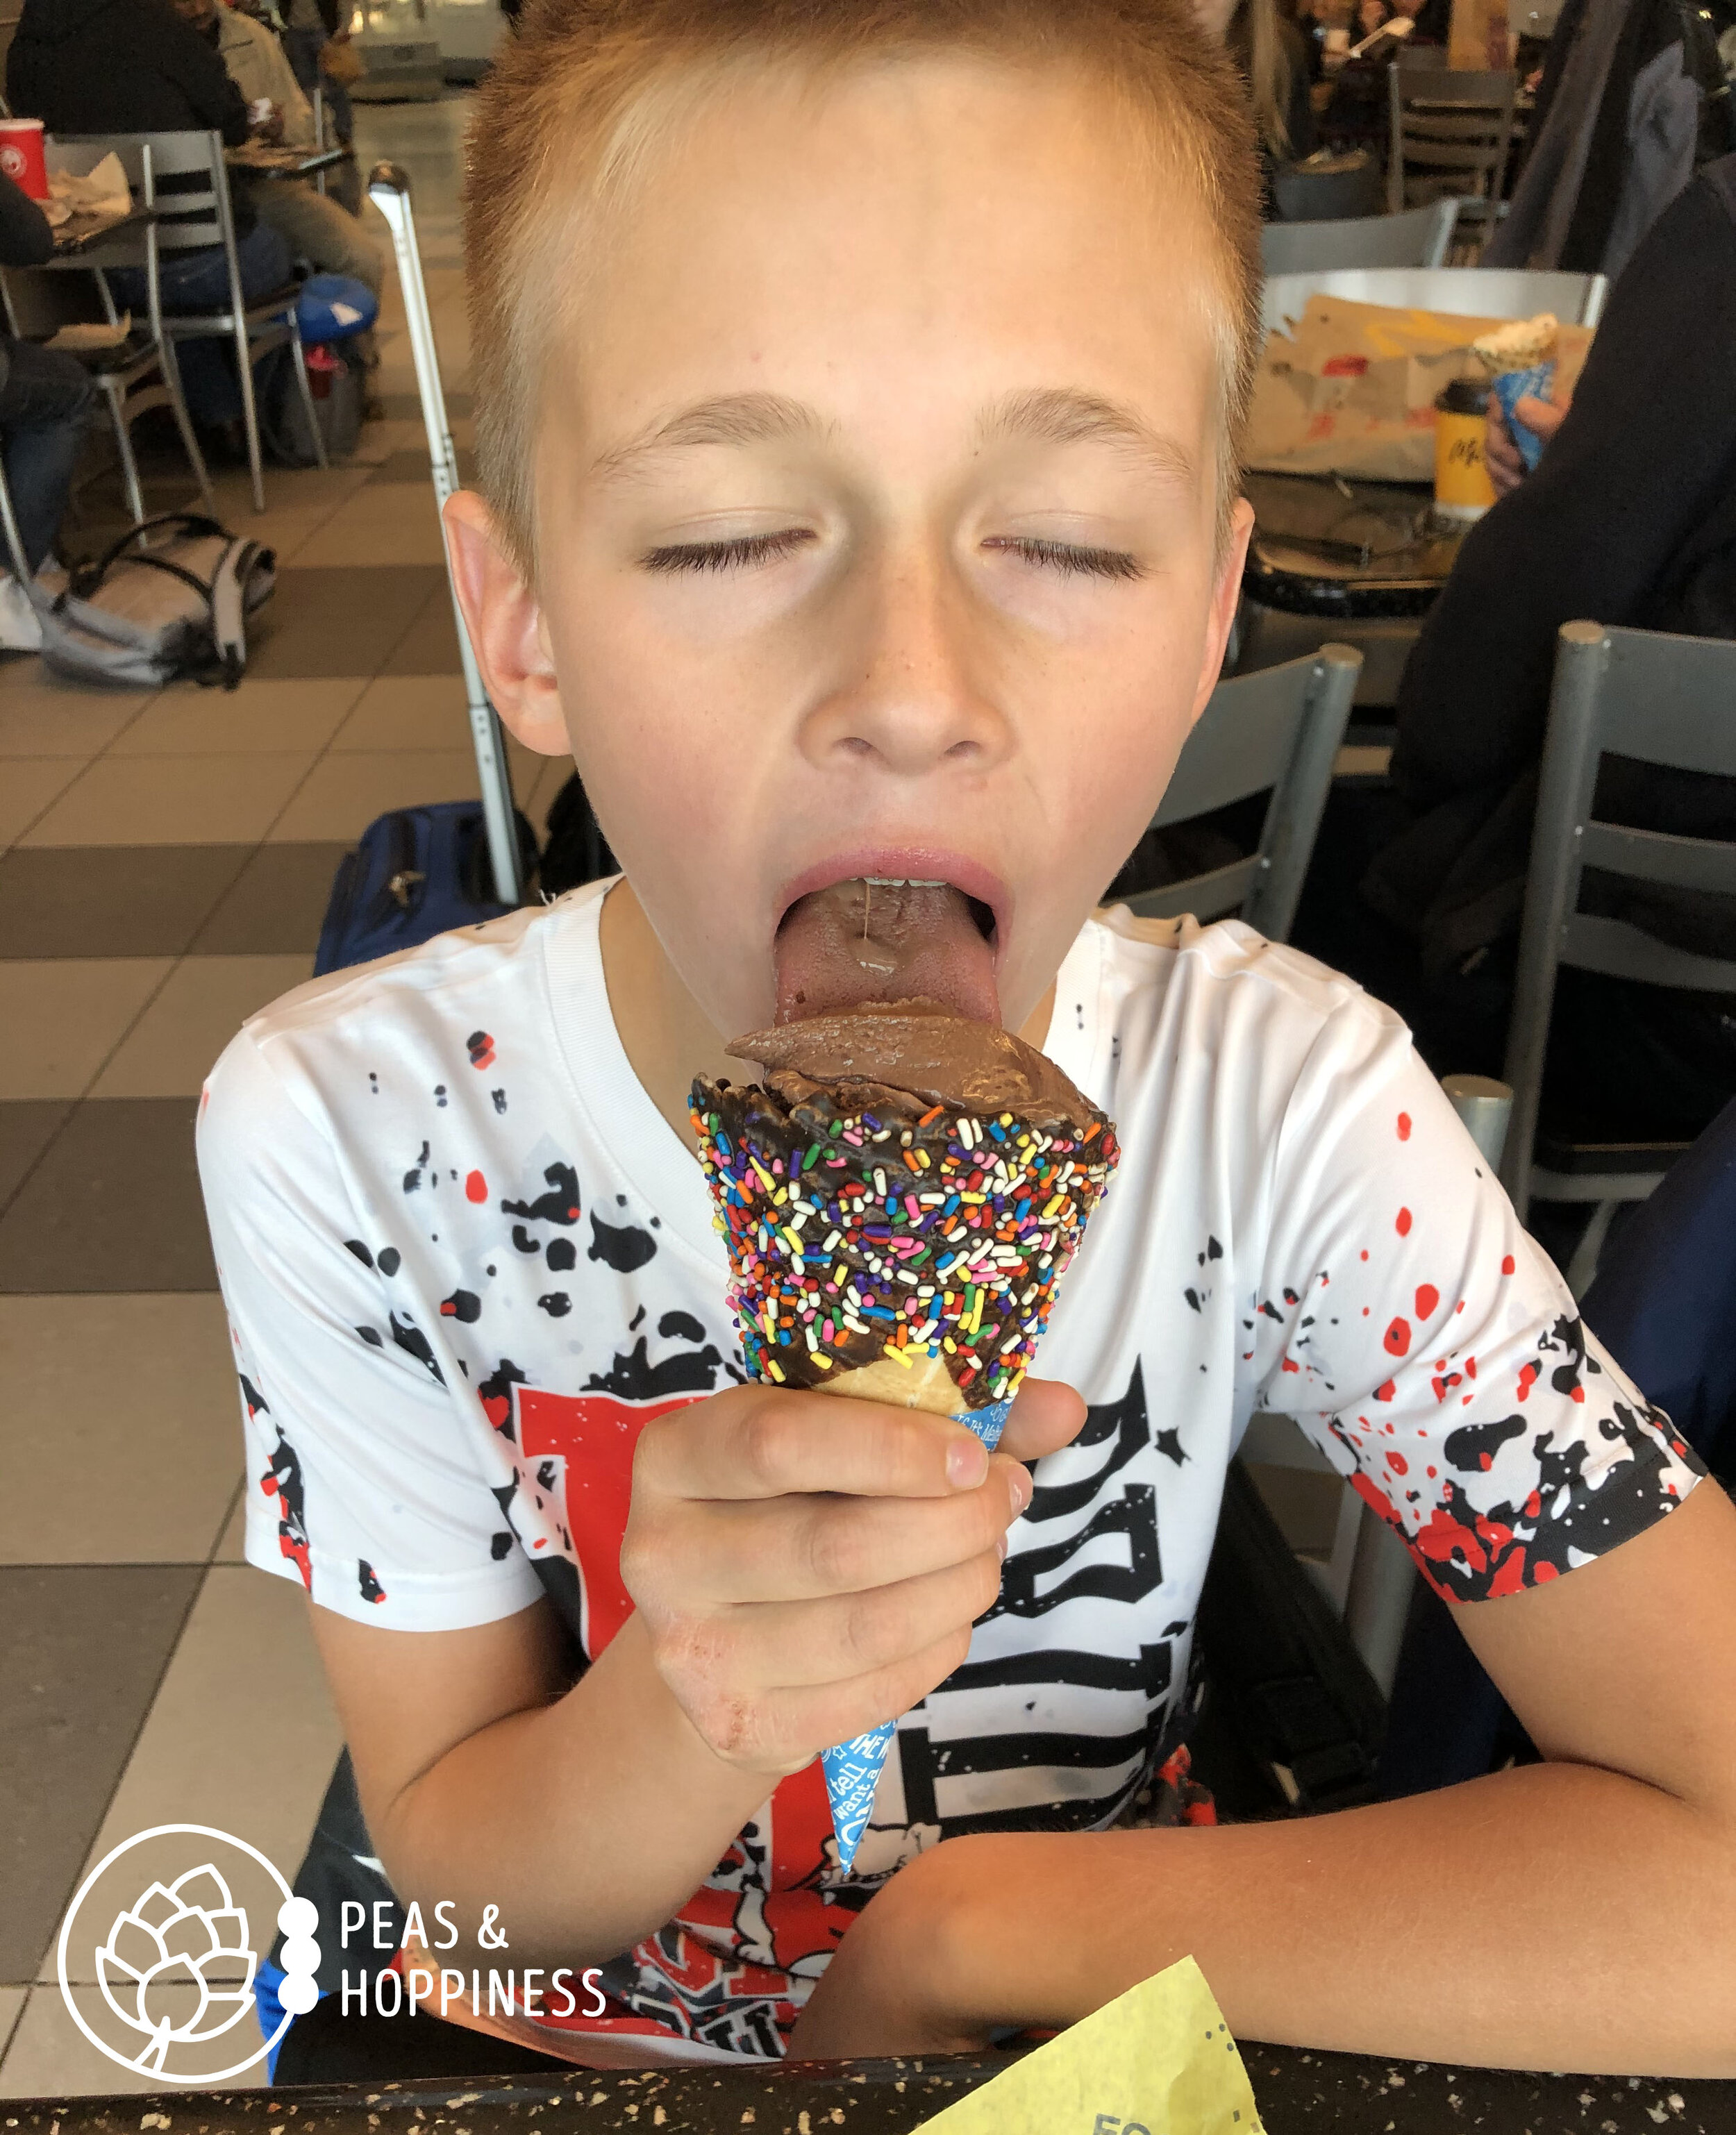 May you always enjoy your food as much as our kiddo enjoying his airport ice cream cone.